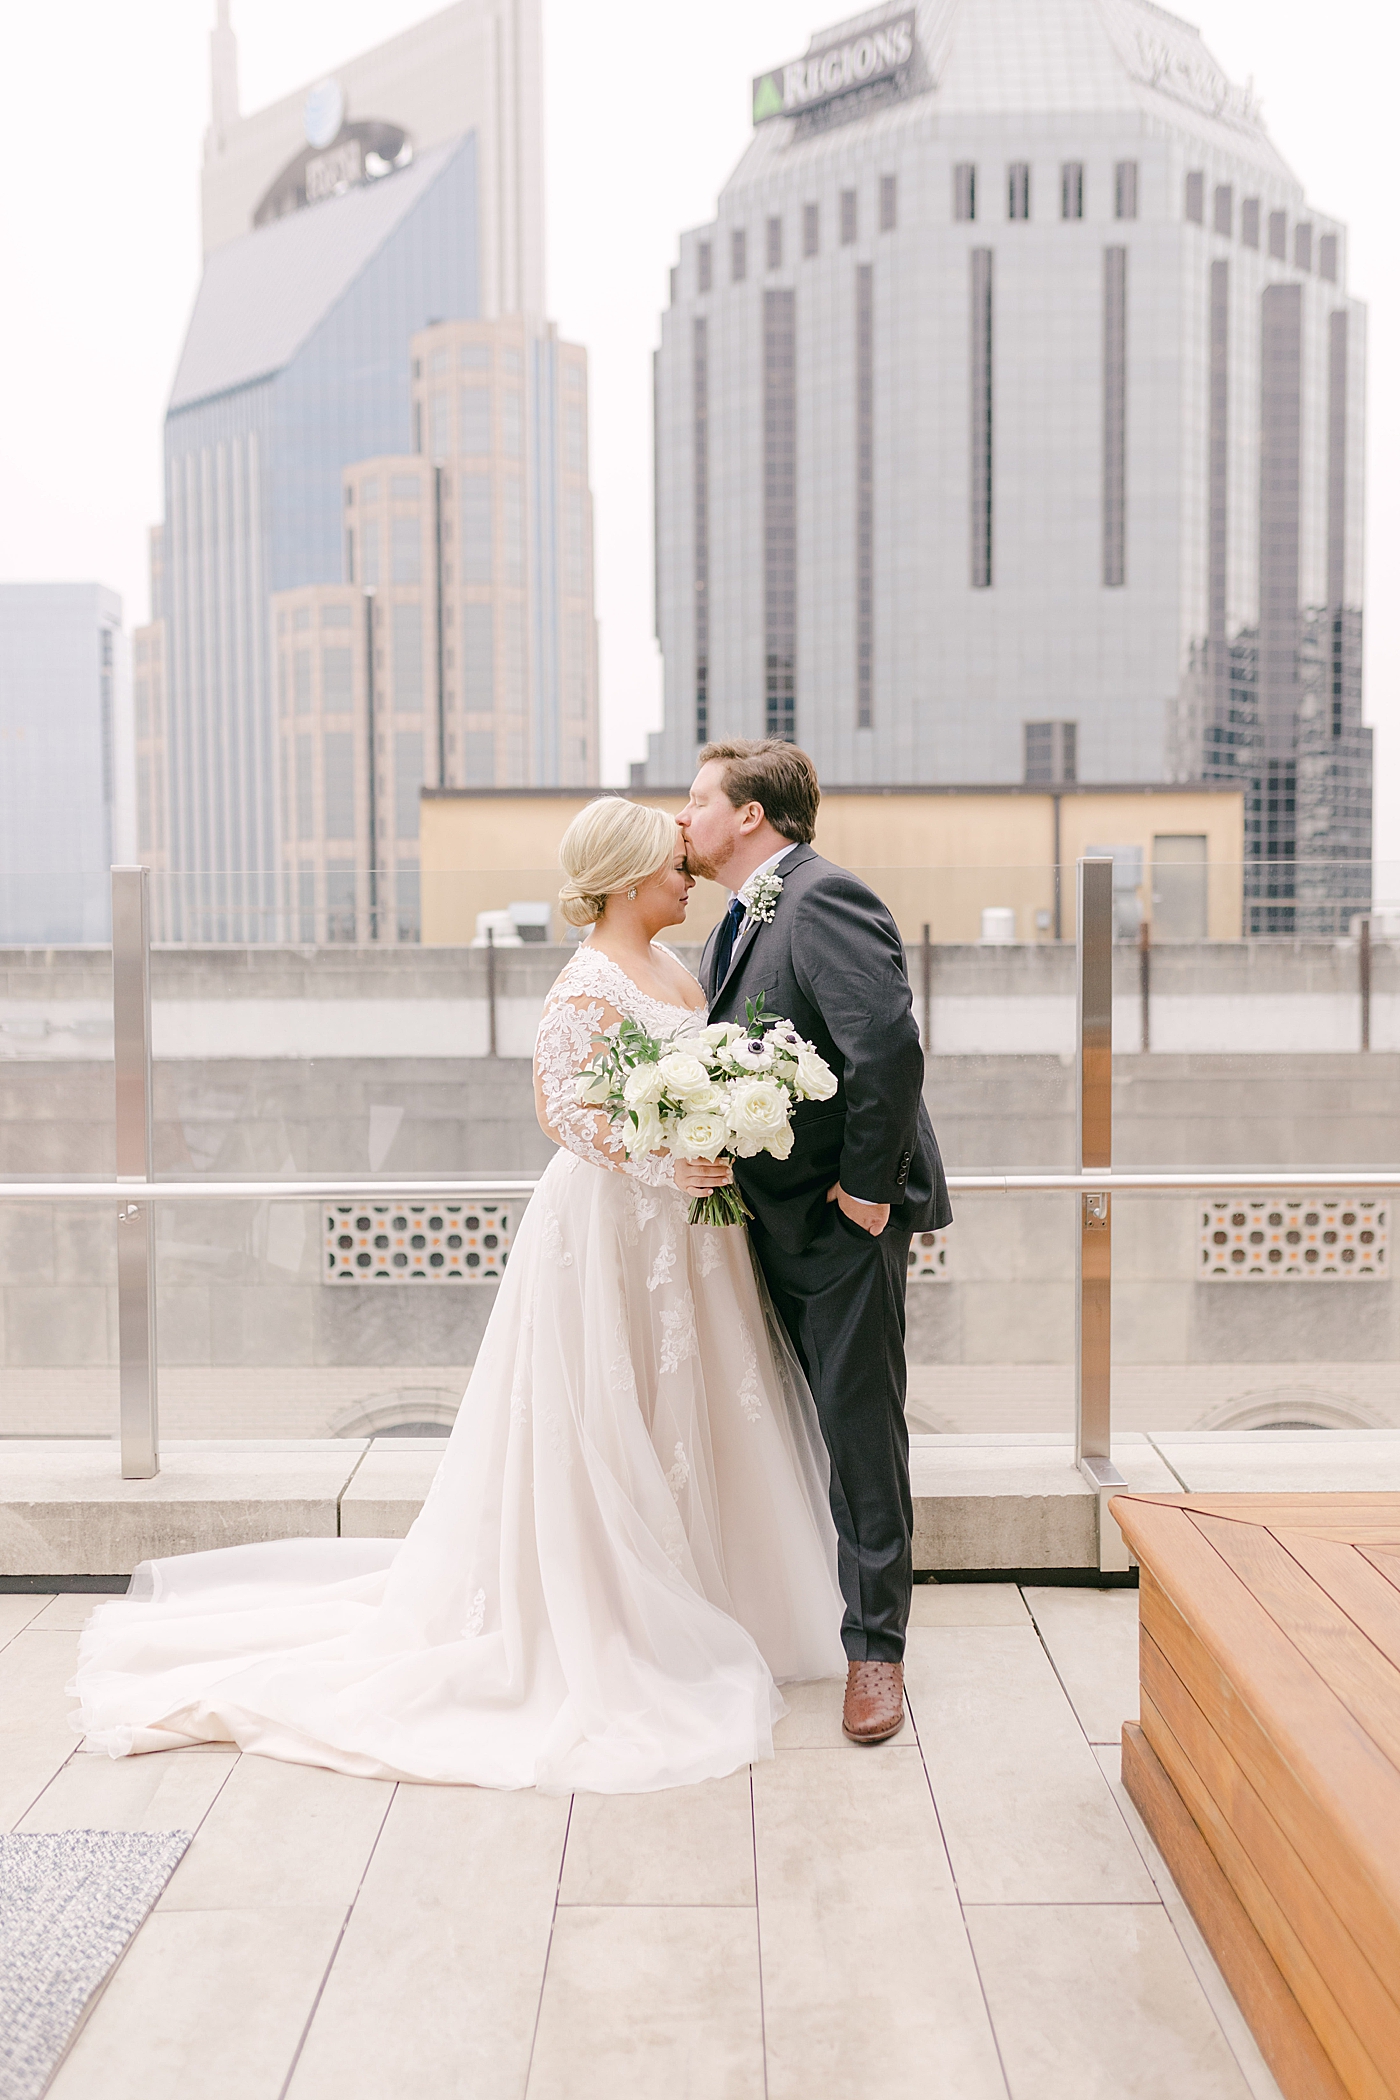 Bride and groom on a rooftop | Photo by Hope Helmuth Photography